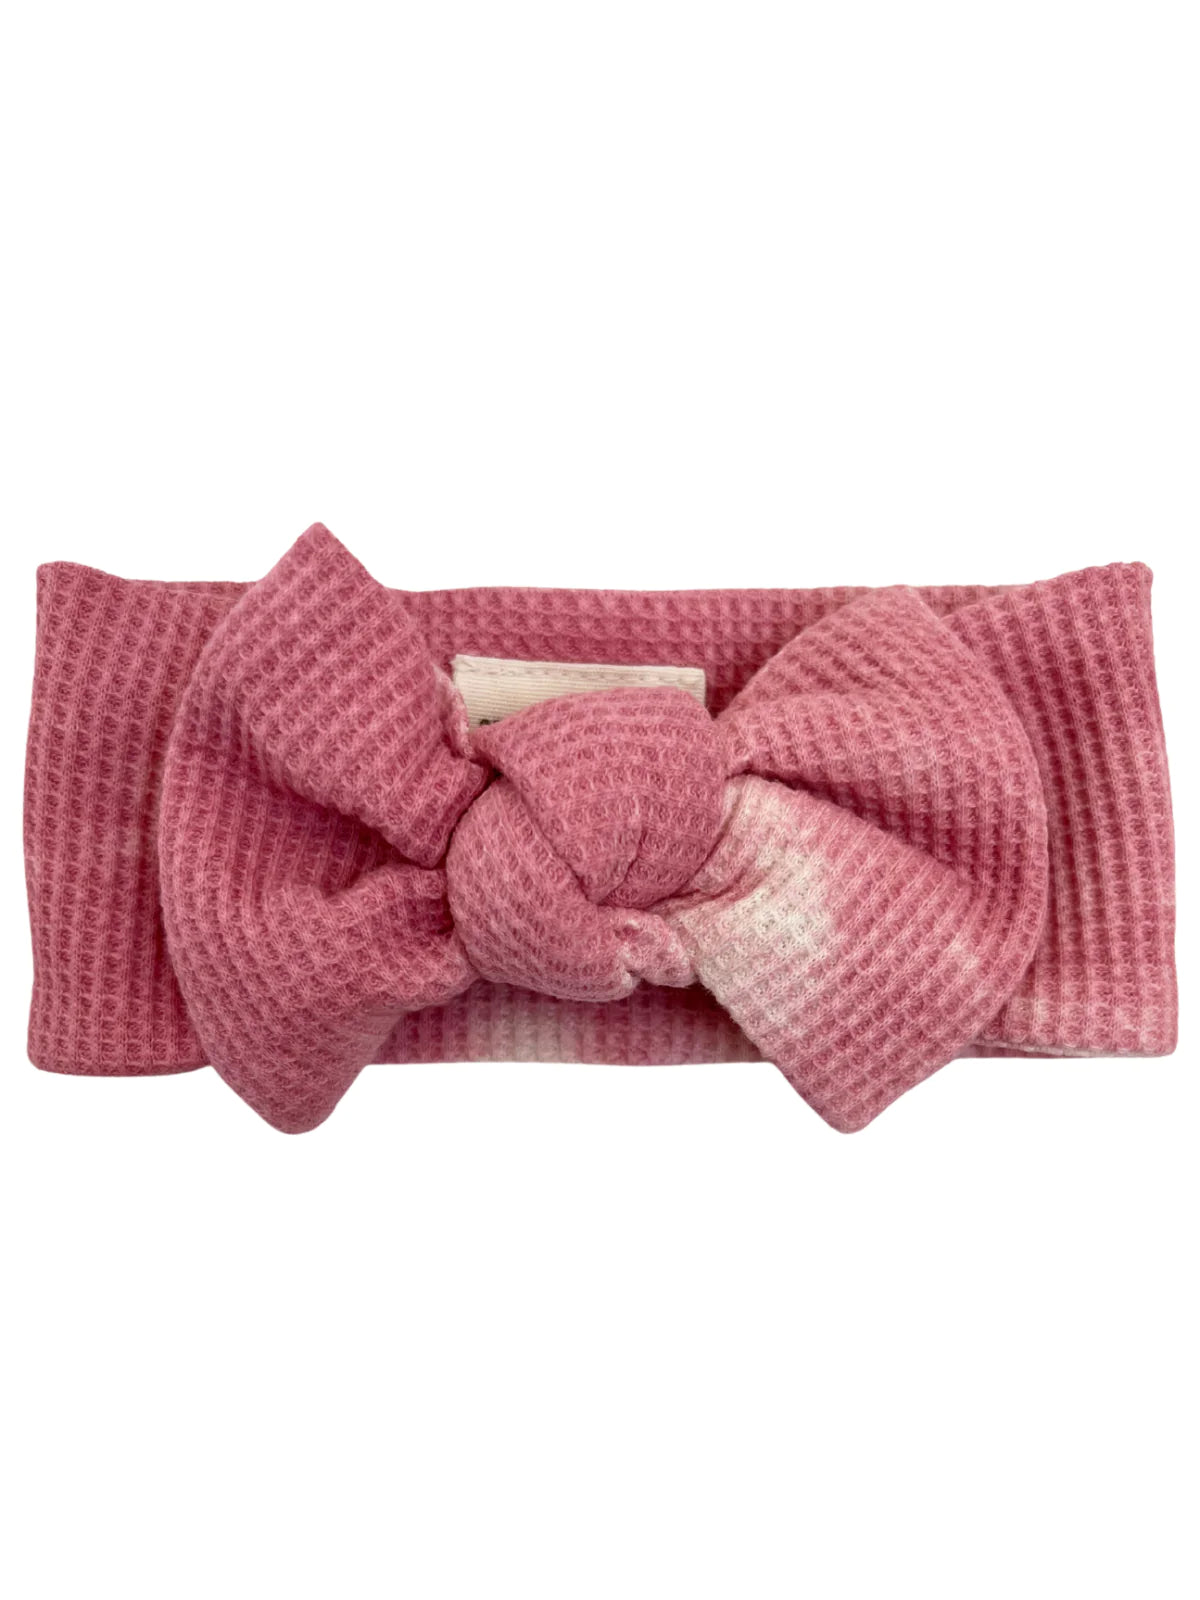 Organic Waffle Knot Bow, Orchid Pink Tie Dye